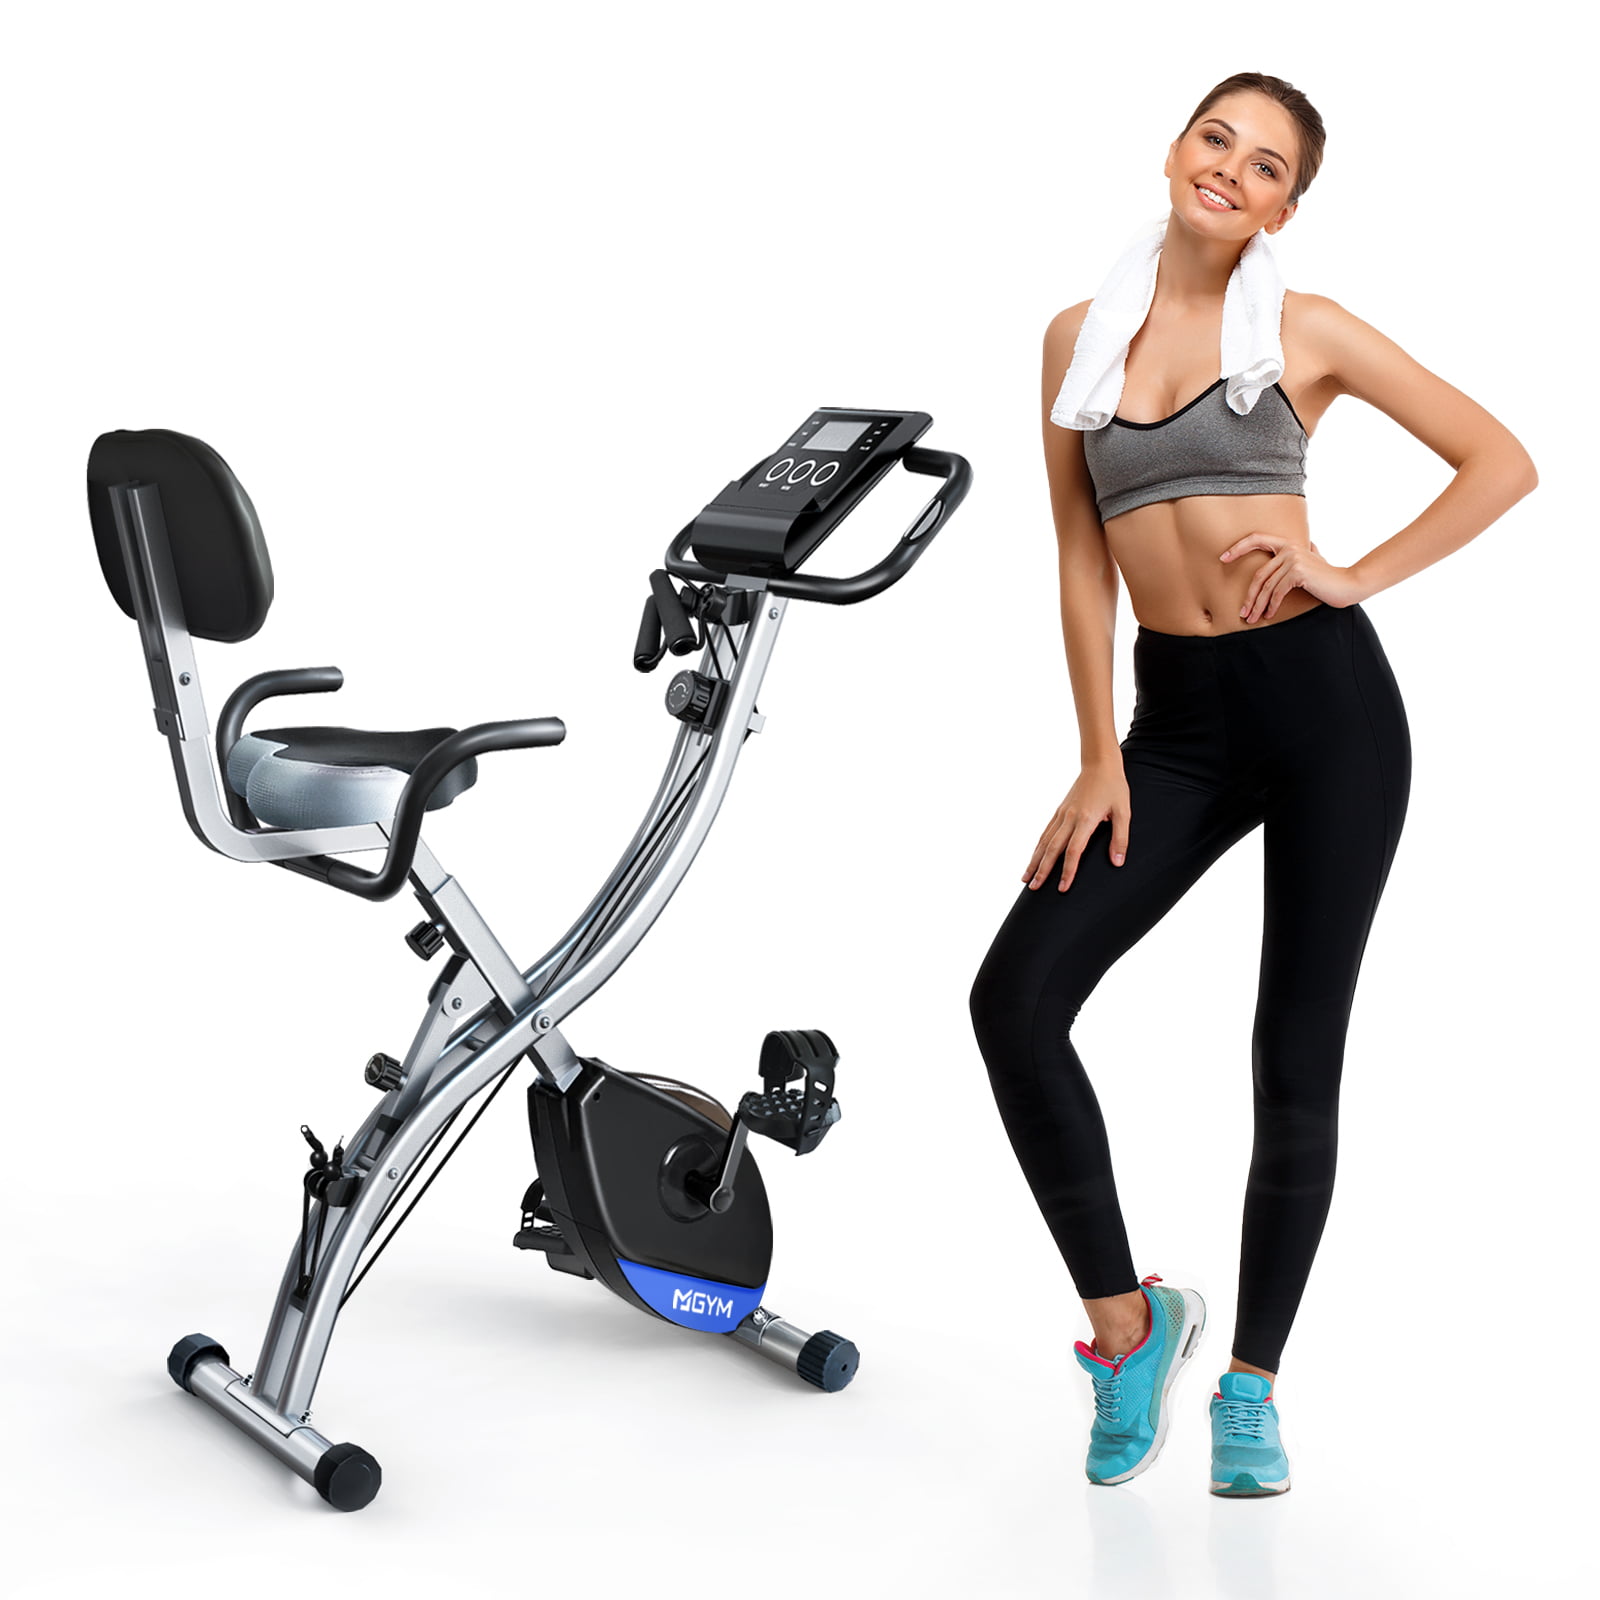 CARDIO FITNESS WORKOUT MACHINE NEW EXERCISE BIKE INDOOR FITNESS BIKE 3 in 1 